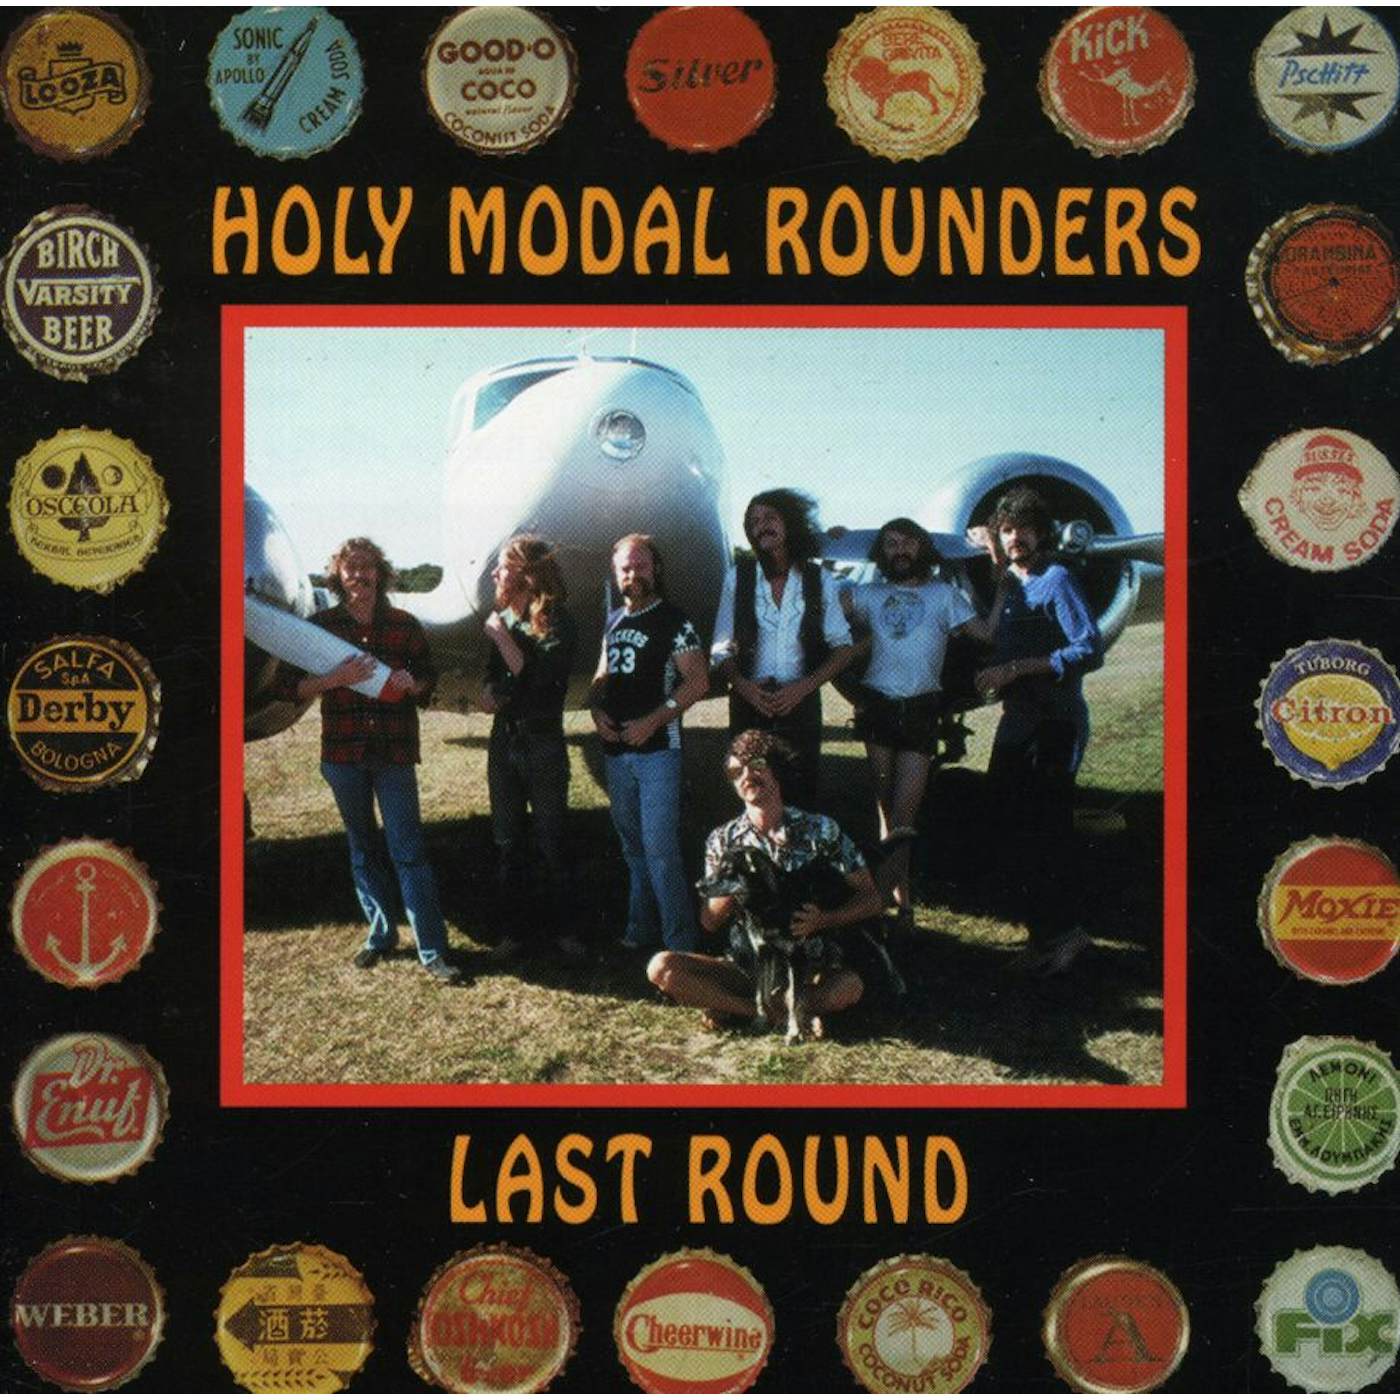 The Holy Modal Rounders LAST ROUND CD